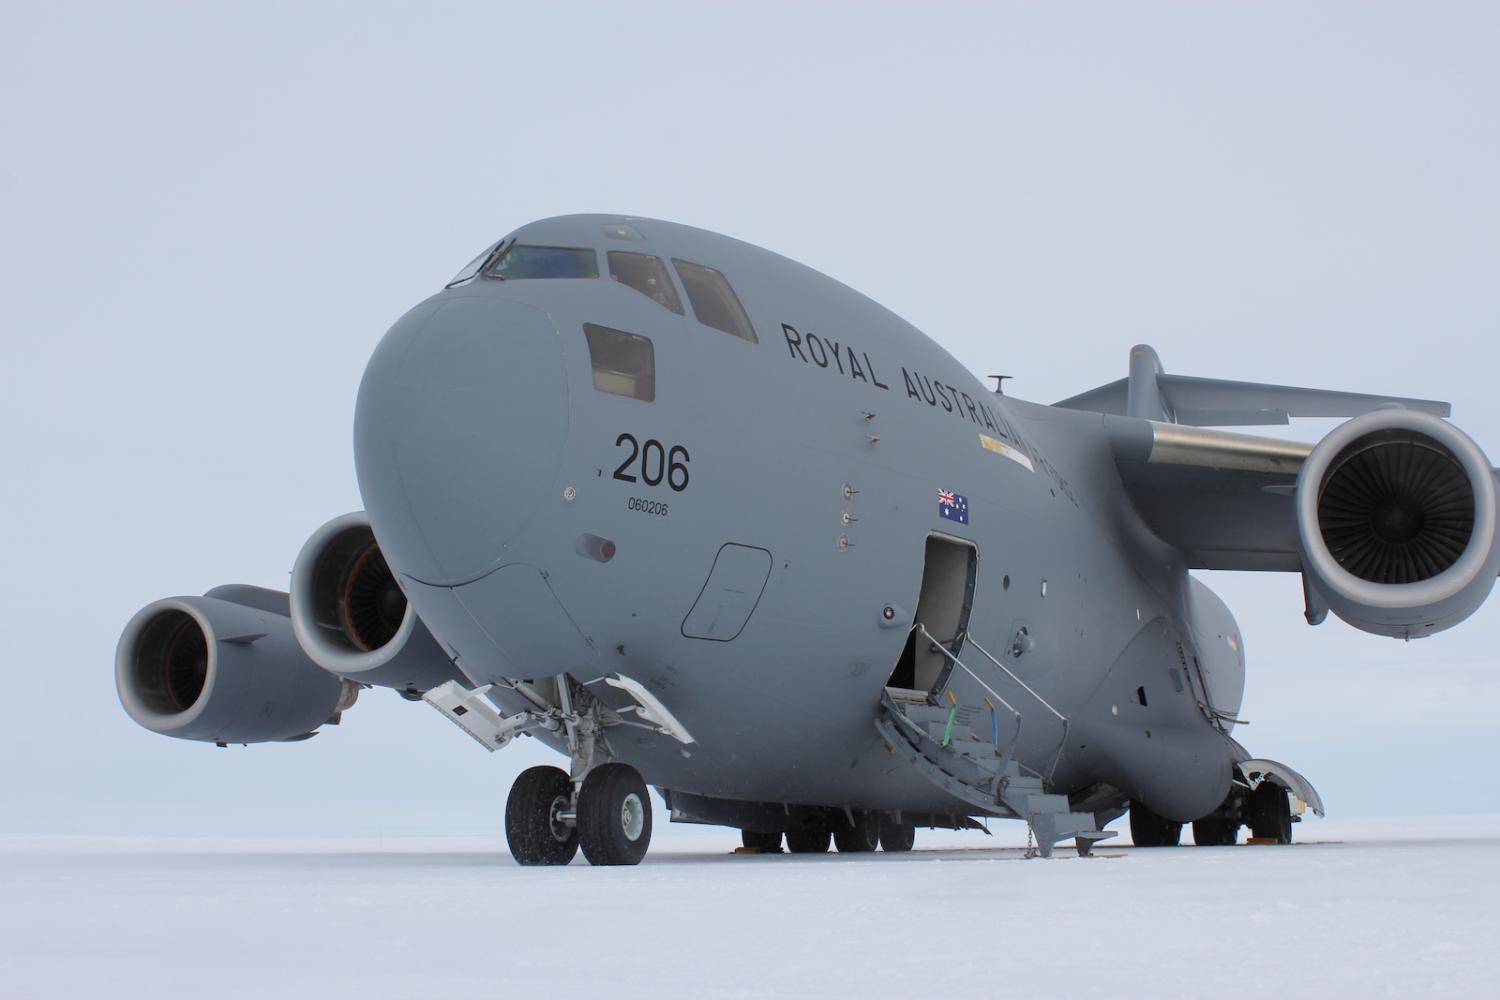 RAAF C-17A Globemaster III at Wilkins Aerodrome in Antarctica for Operation Southern Discovery 20/21 (Defence Department)